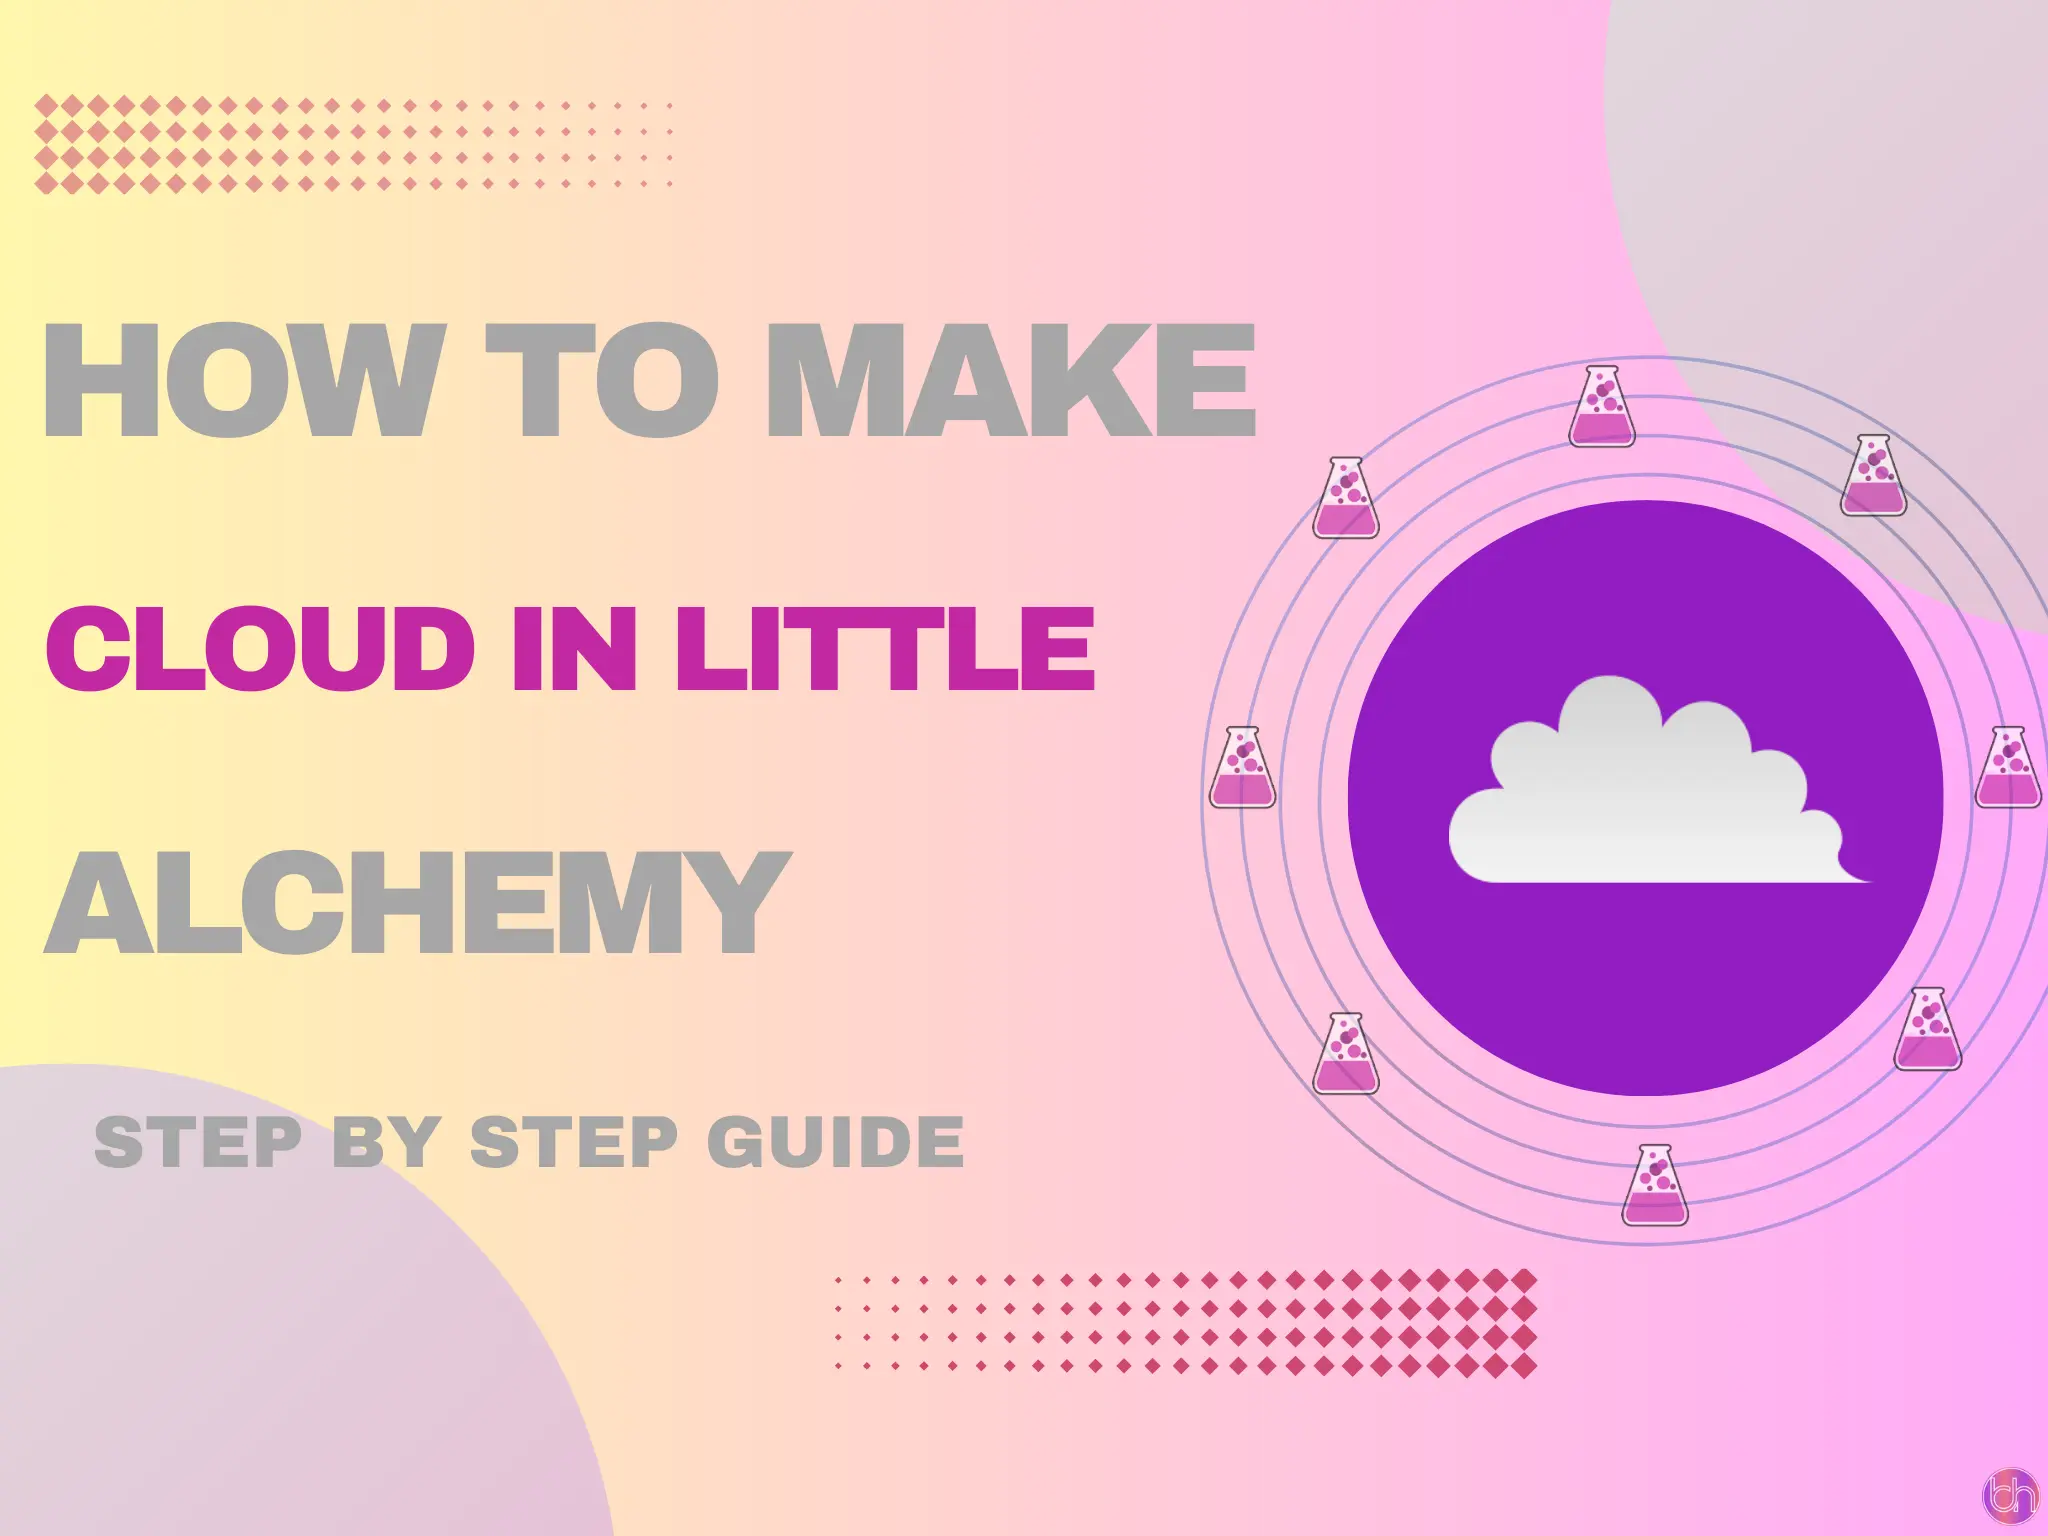 How to make Cloud in little alchemy